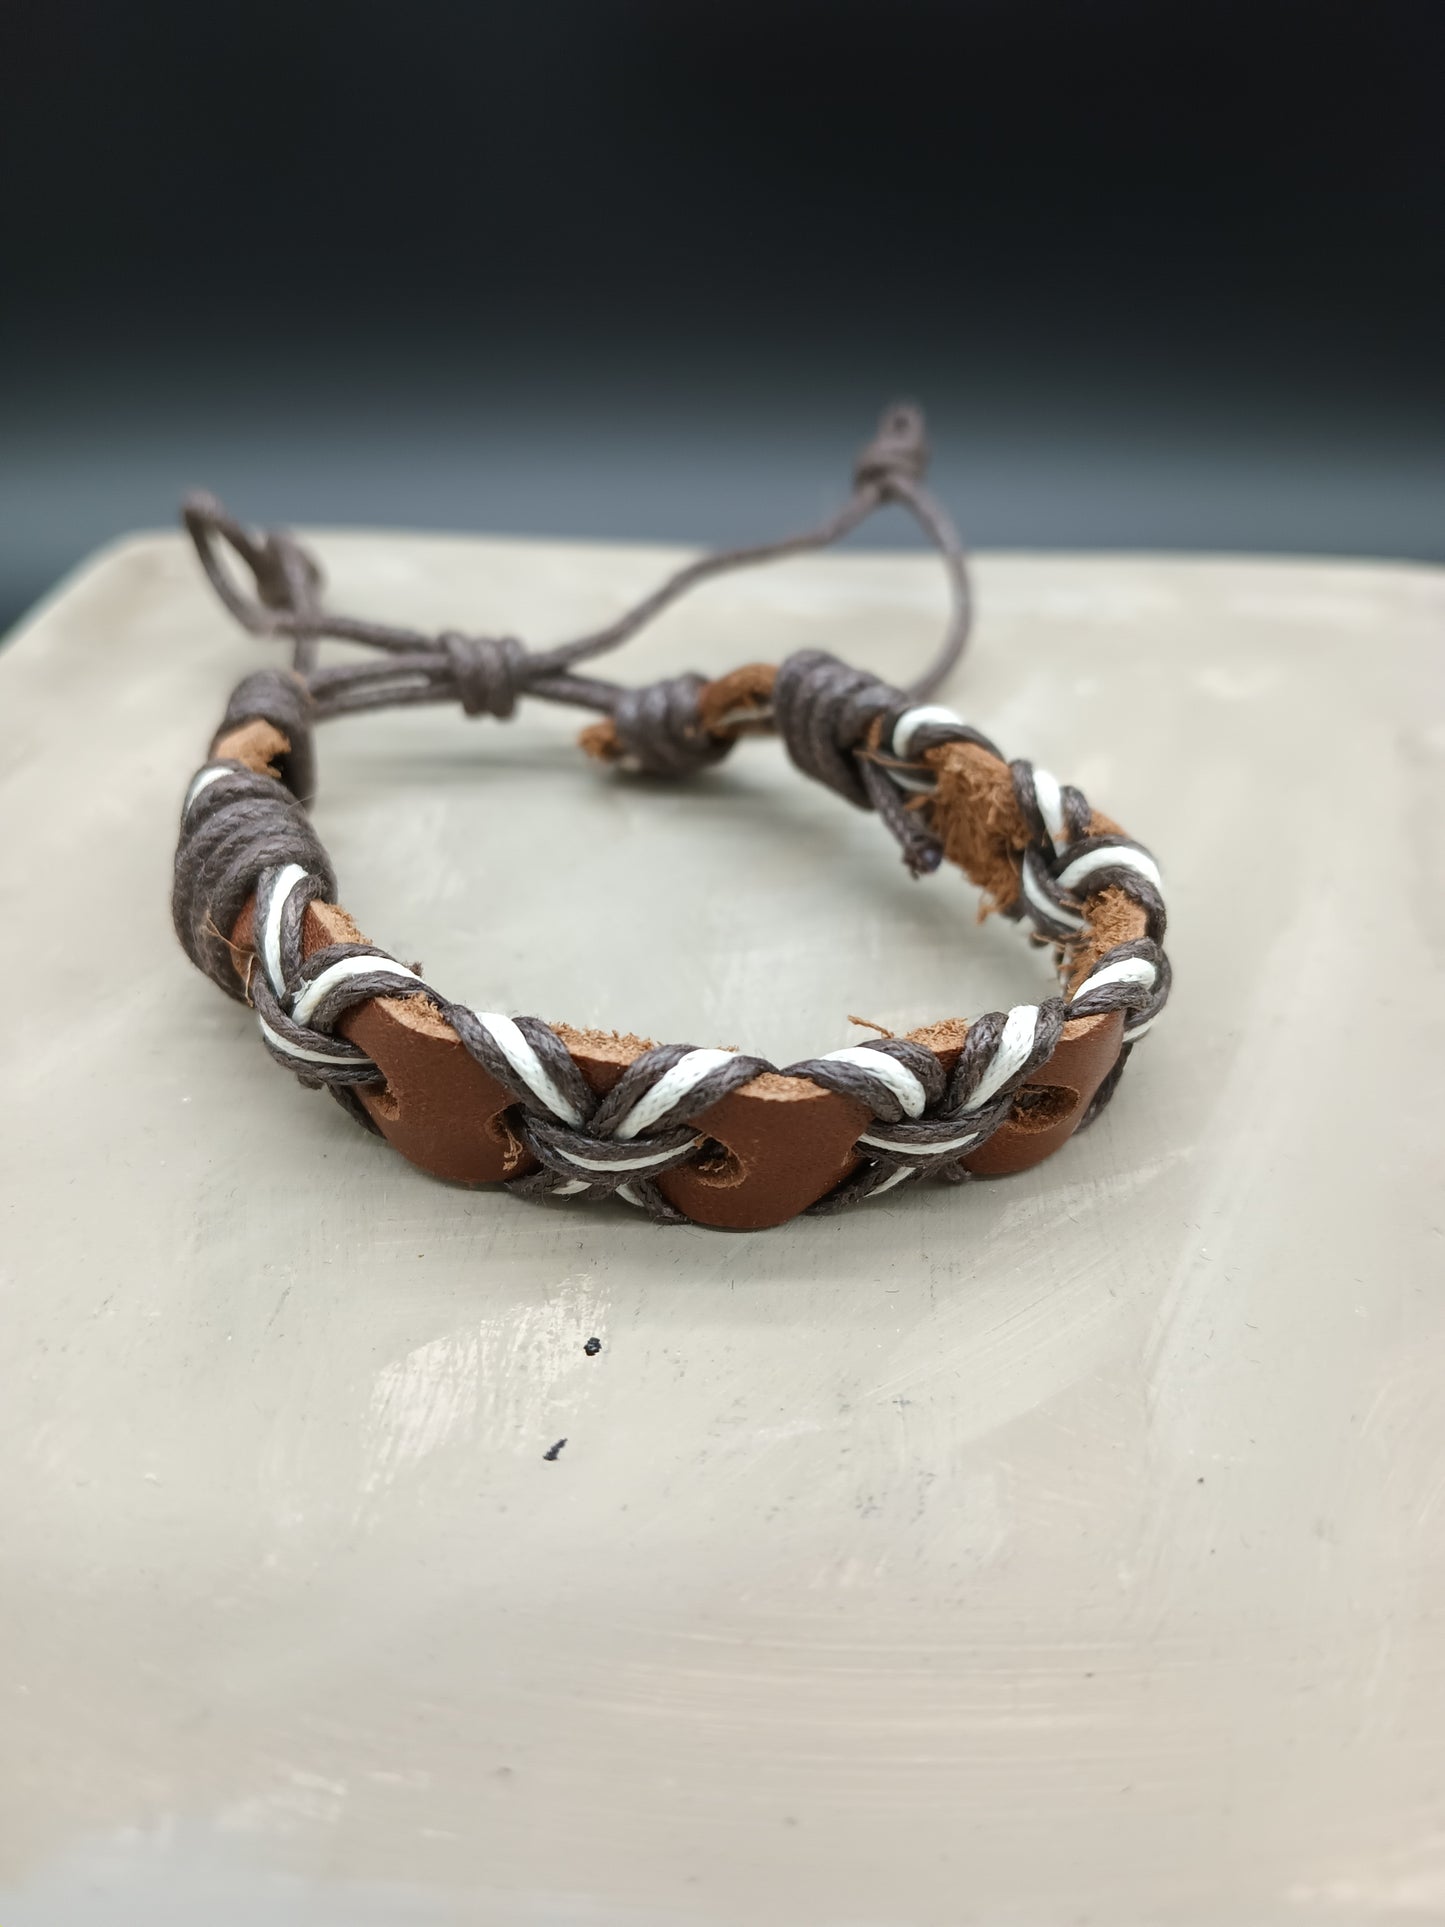 *Light Brown Leather Mens Bracelet With Black and White Cords Interlaced